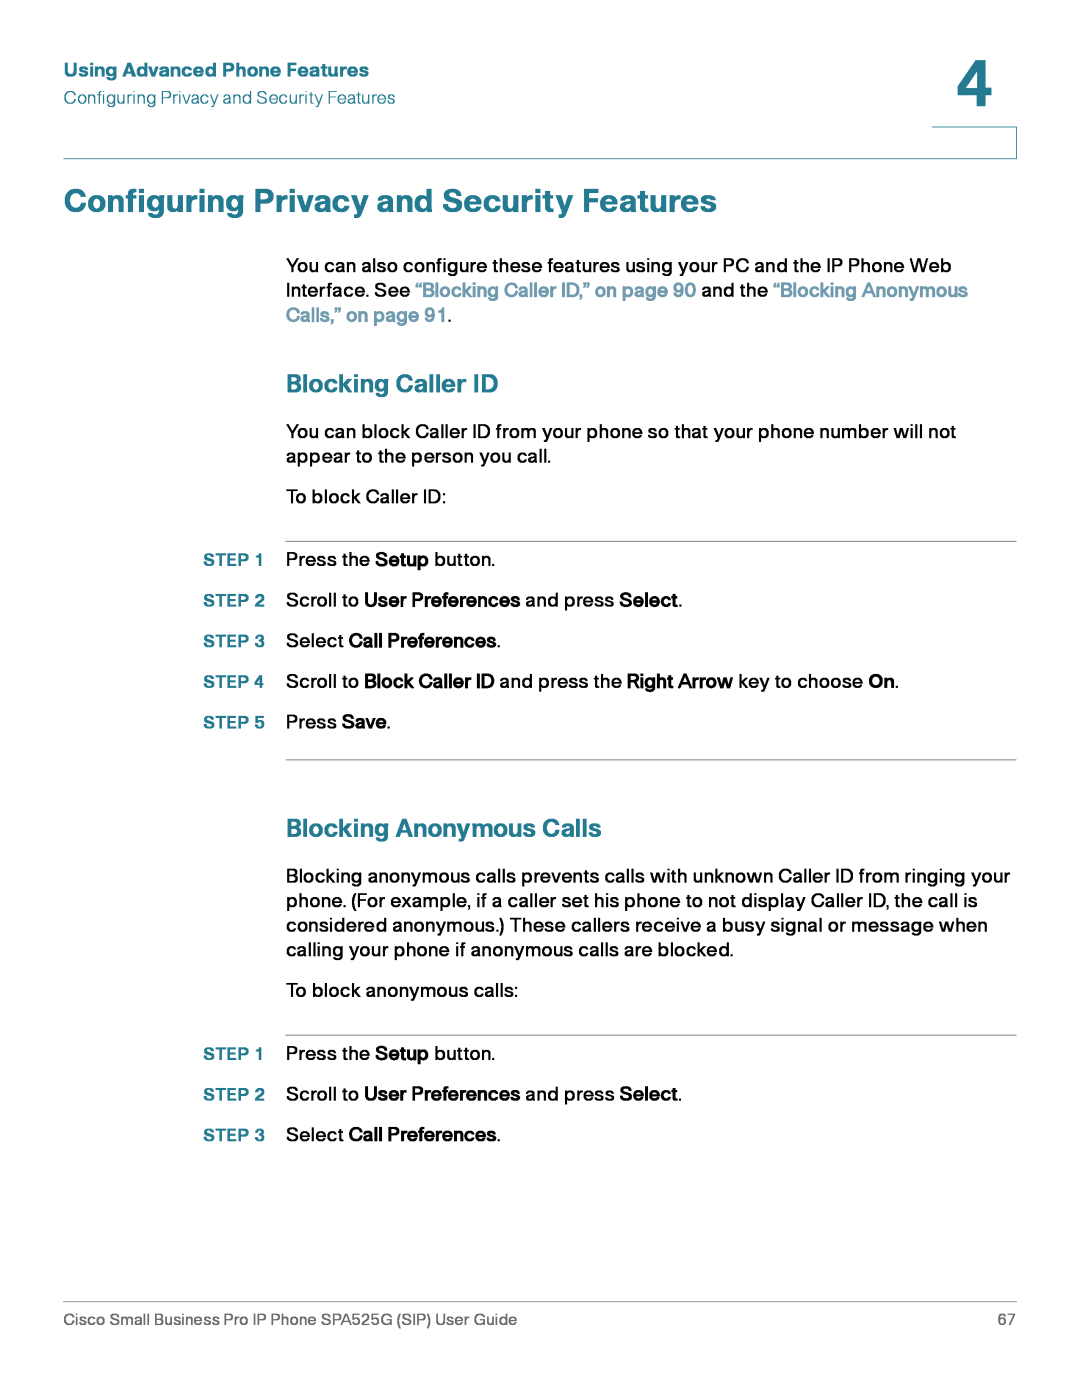 Cisco Systems SPA525G manual Configuring Privacy and Security Features, Blocking Caller ID, Blocking Anonymous Calls 